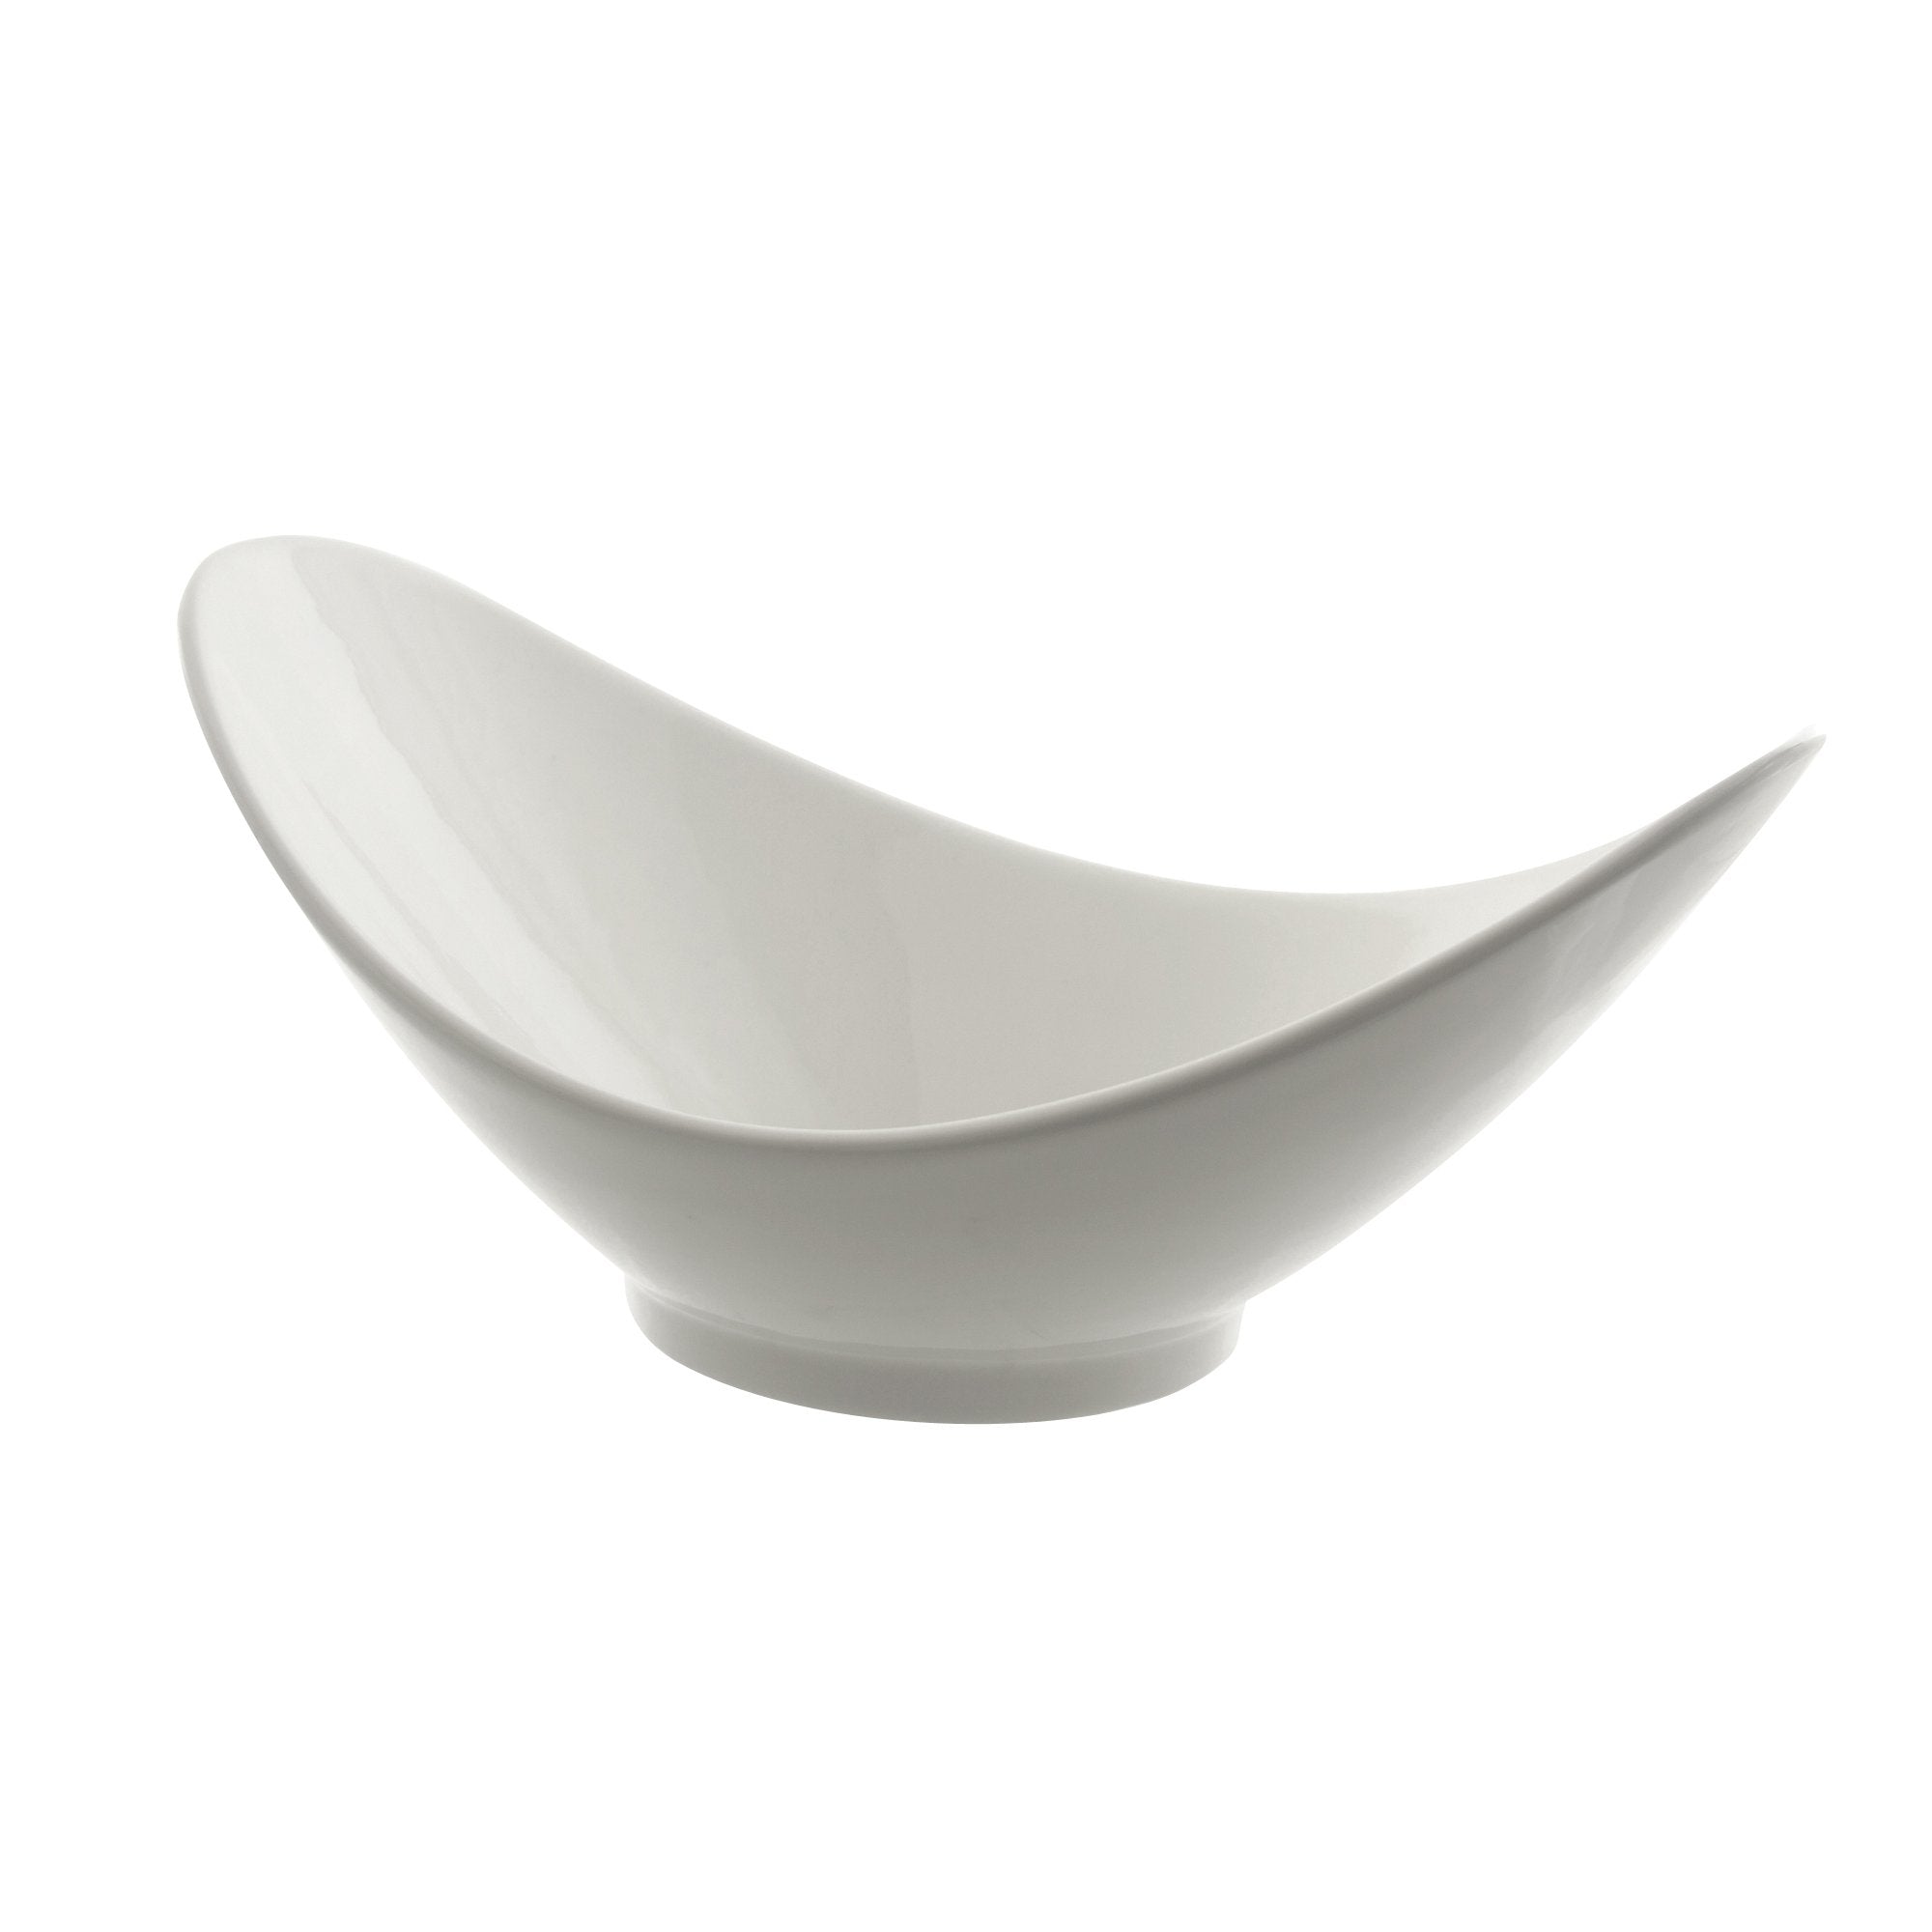 Whittier Collection, Fruit Bowl  (4/Case) - iFoodservice Online